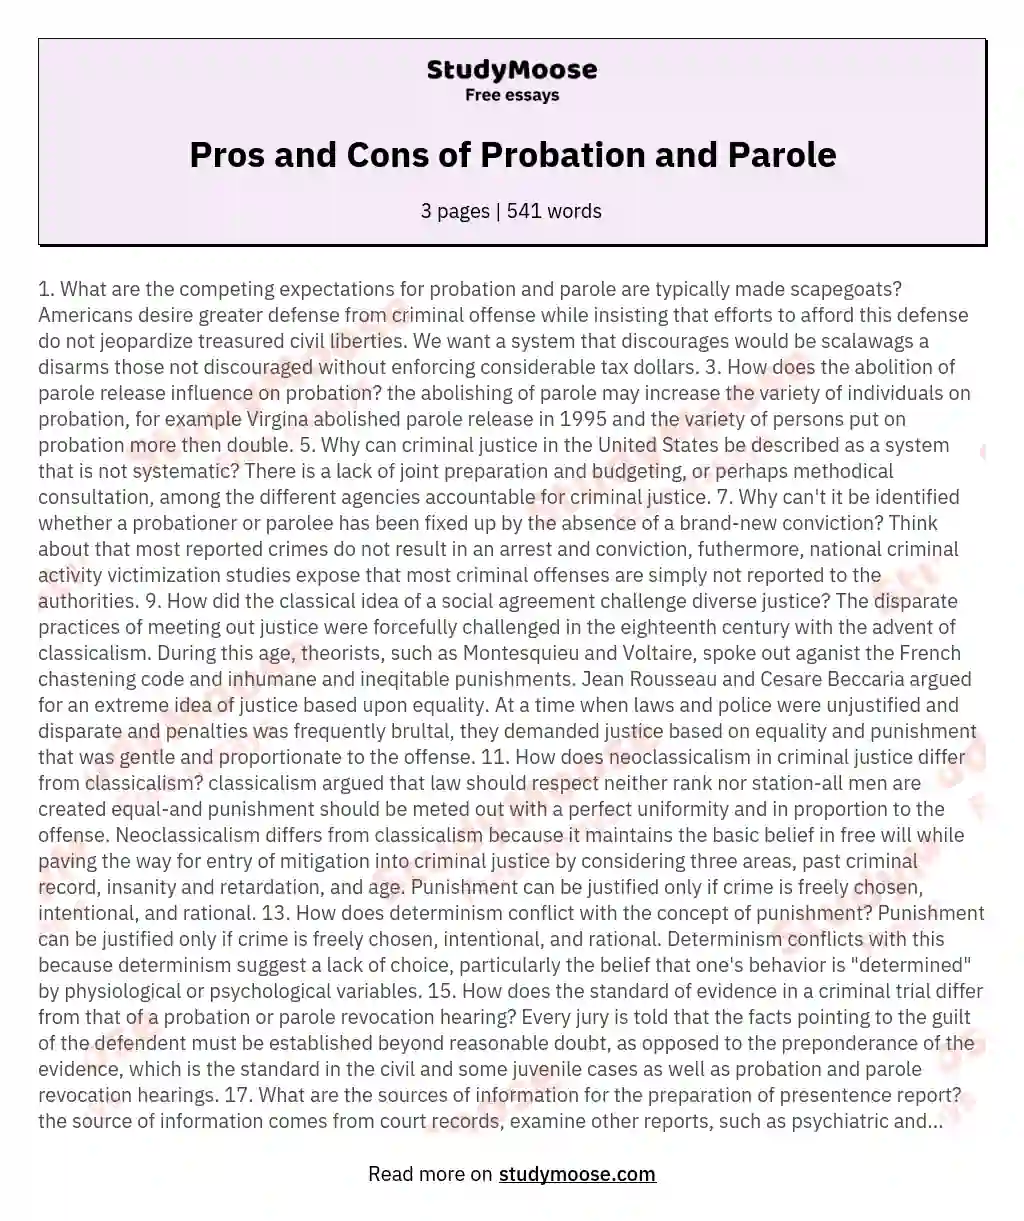 Pros and Cons of Probation and Parole